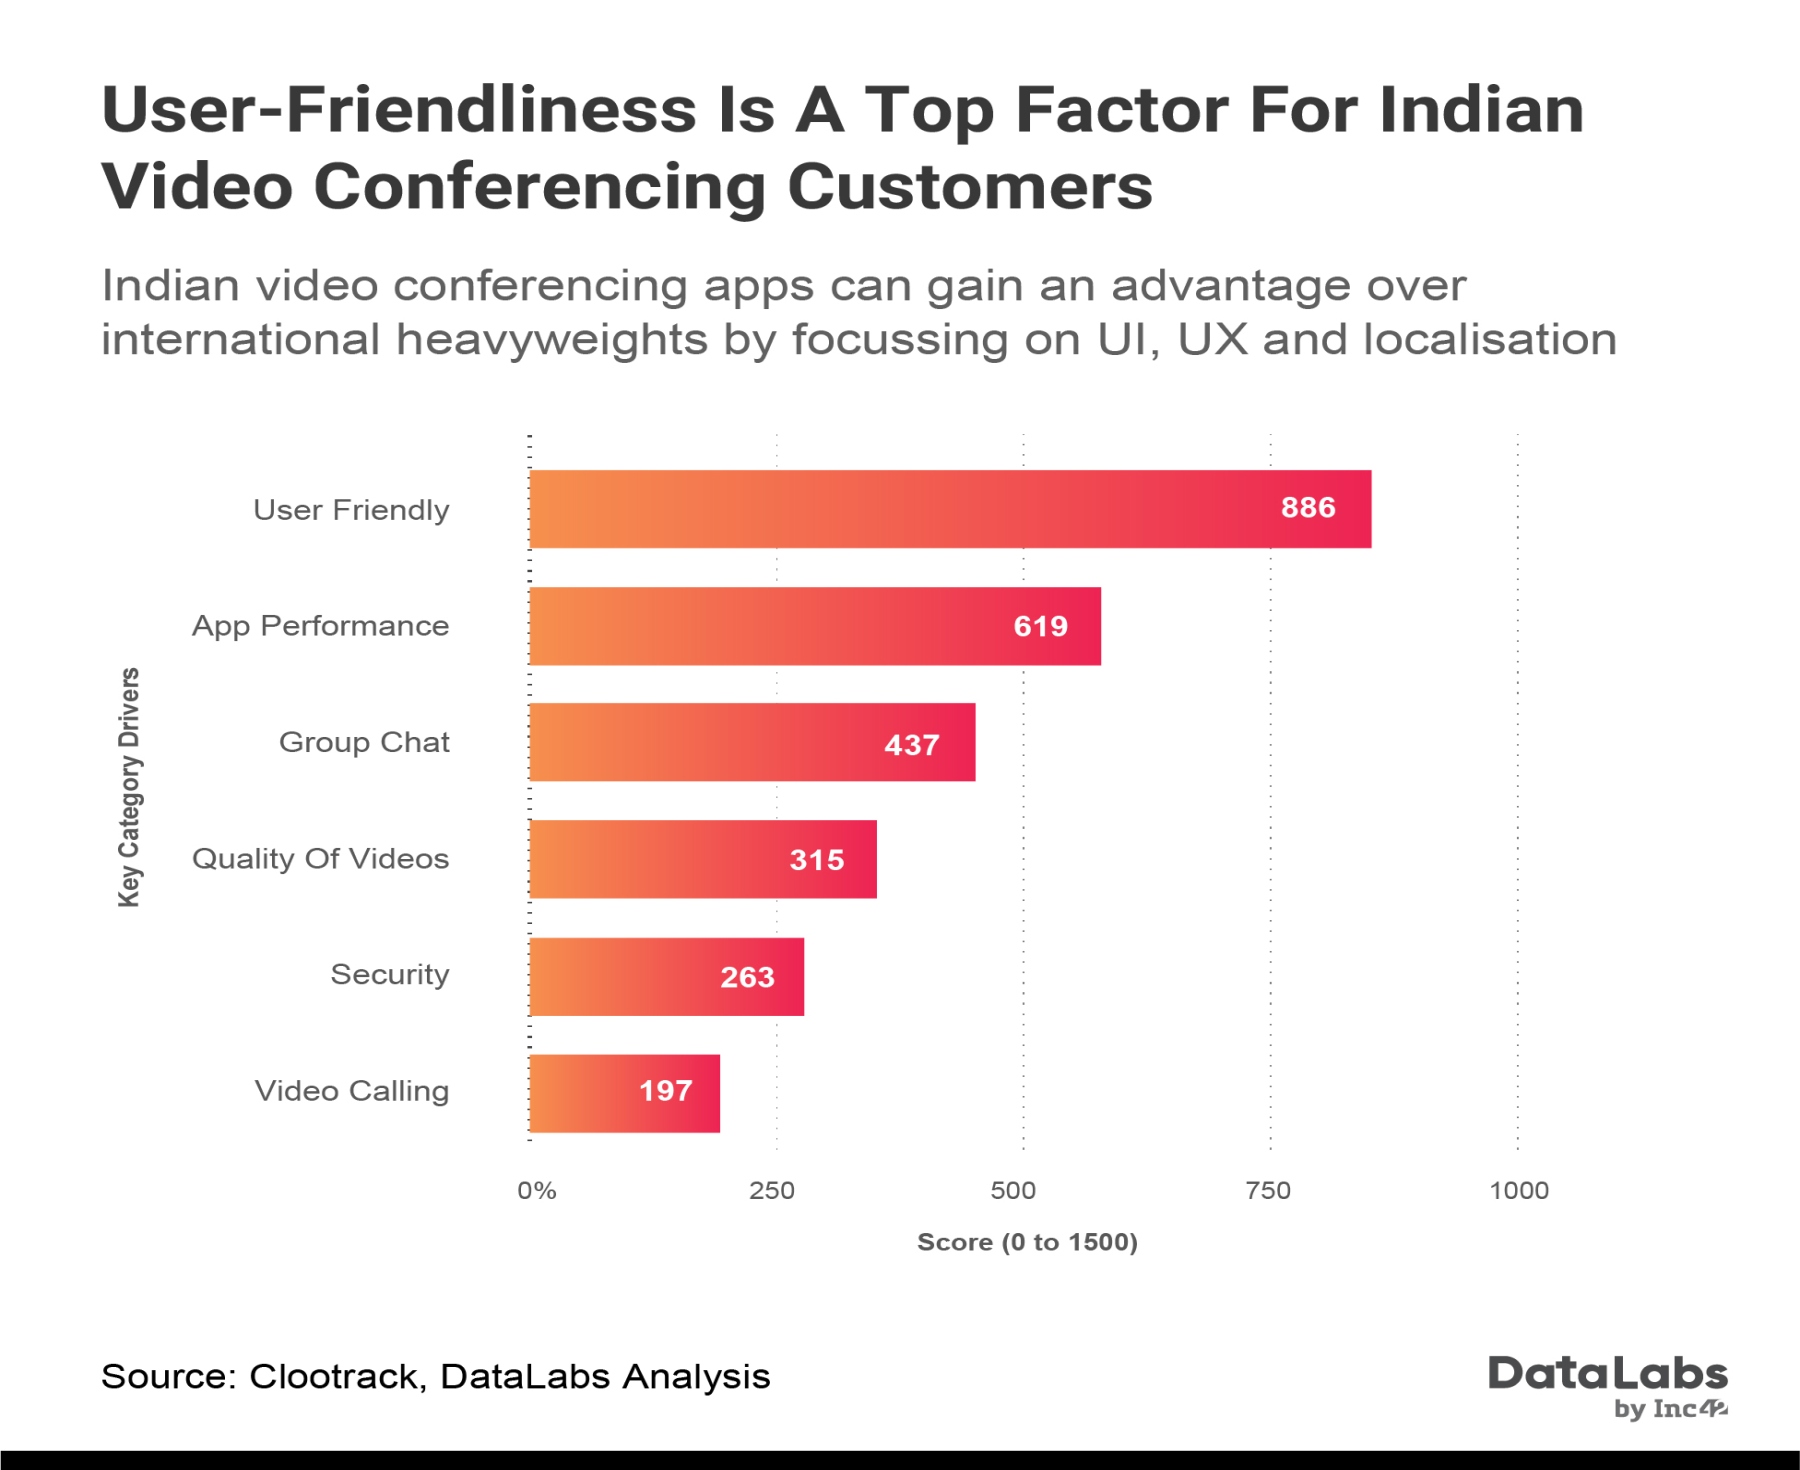 Indian video conferencing apps can gain an advantage over international heavyweights by focussing on UI, UX and localisation 